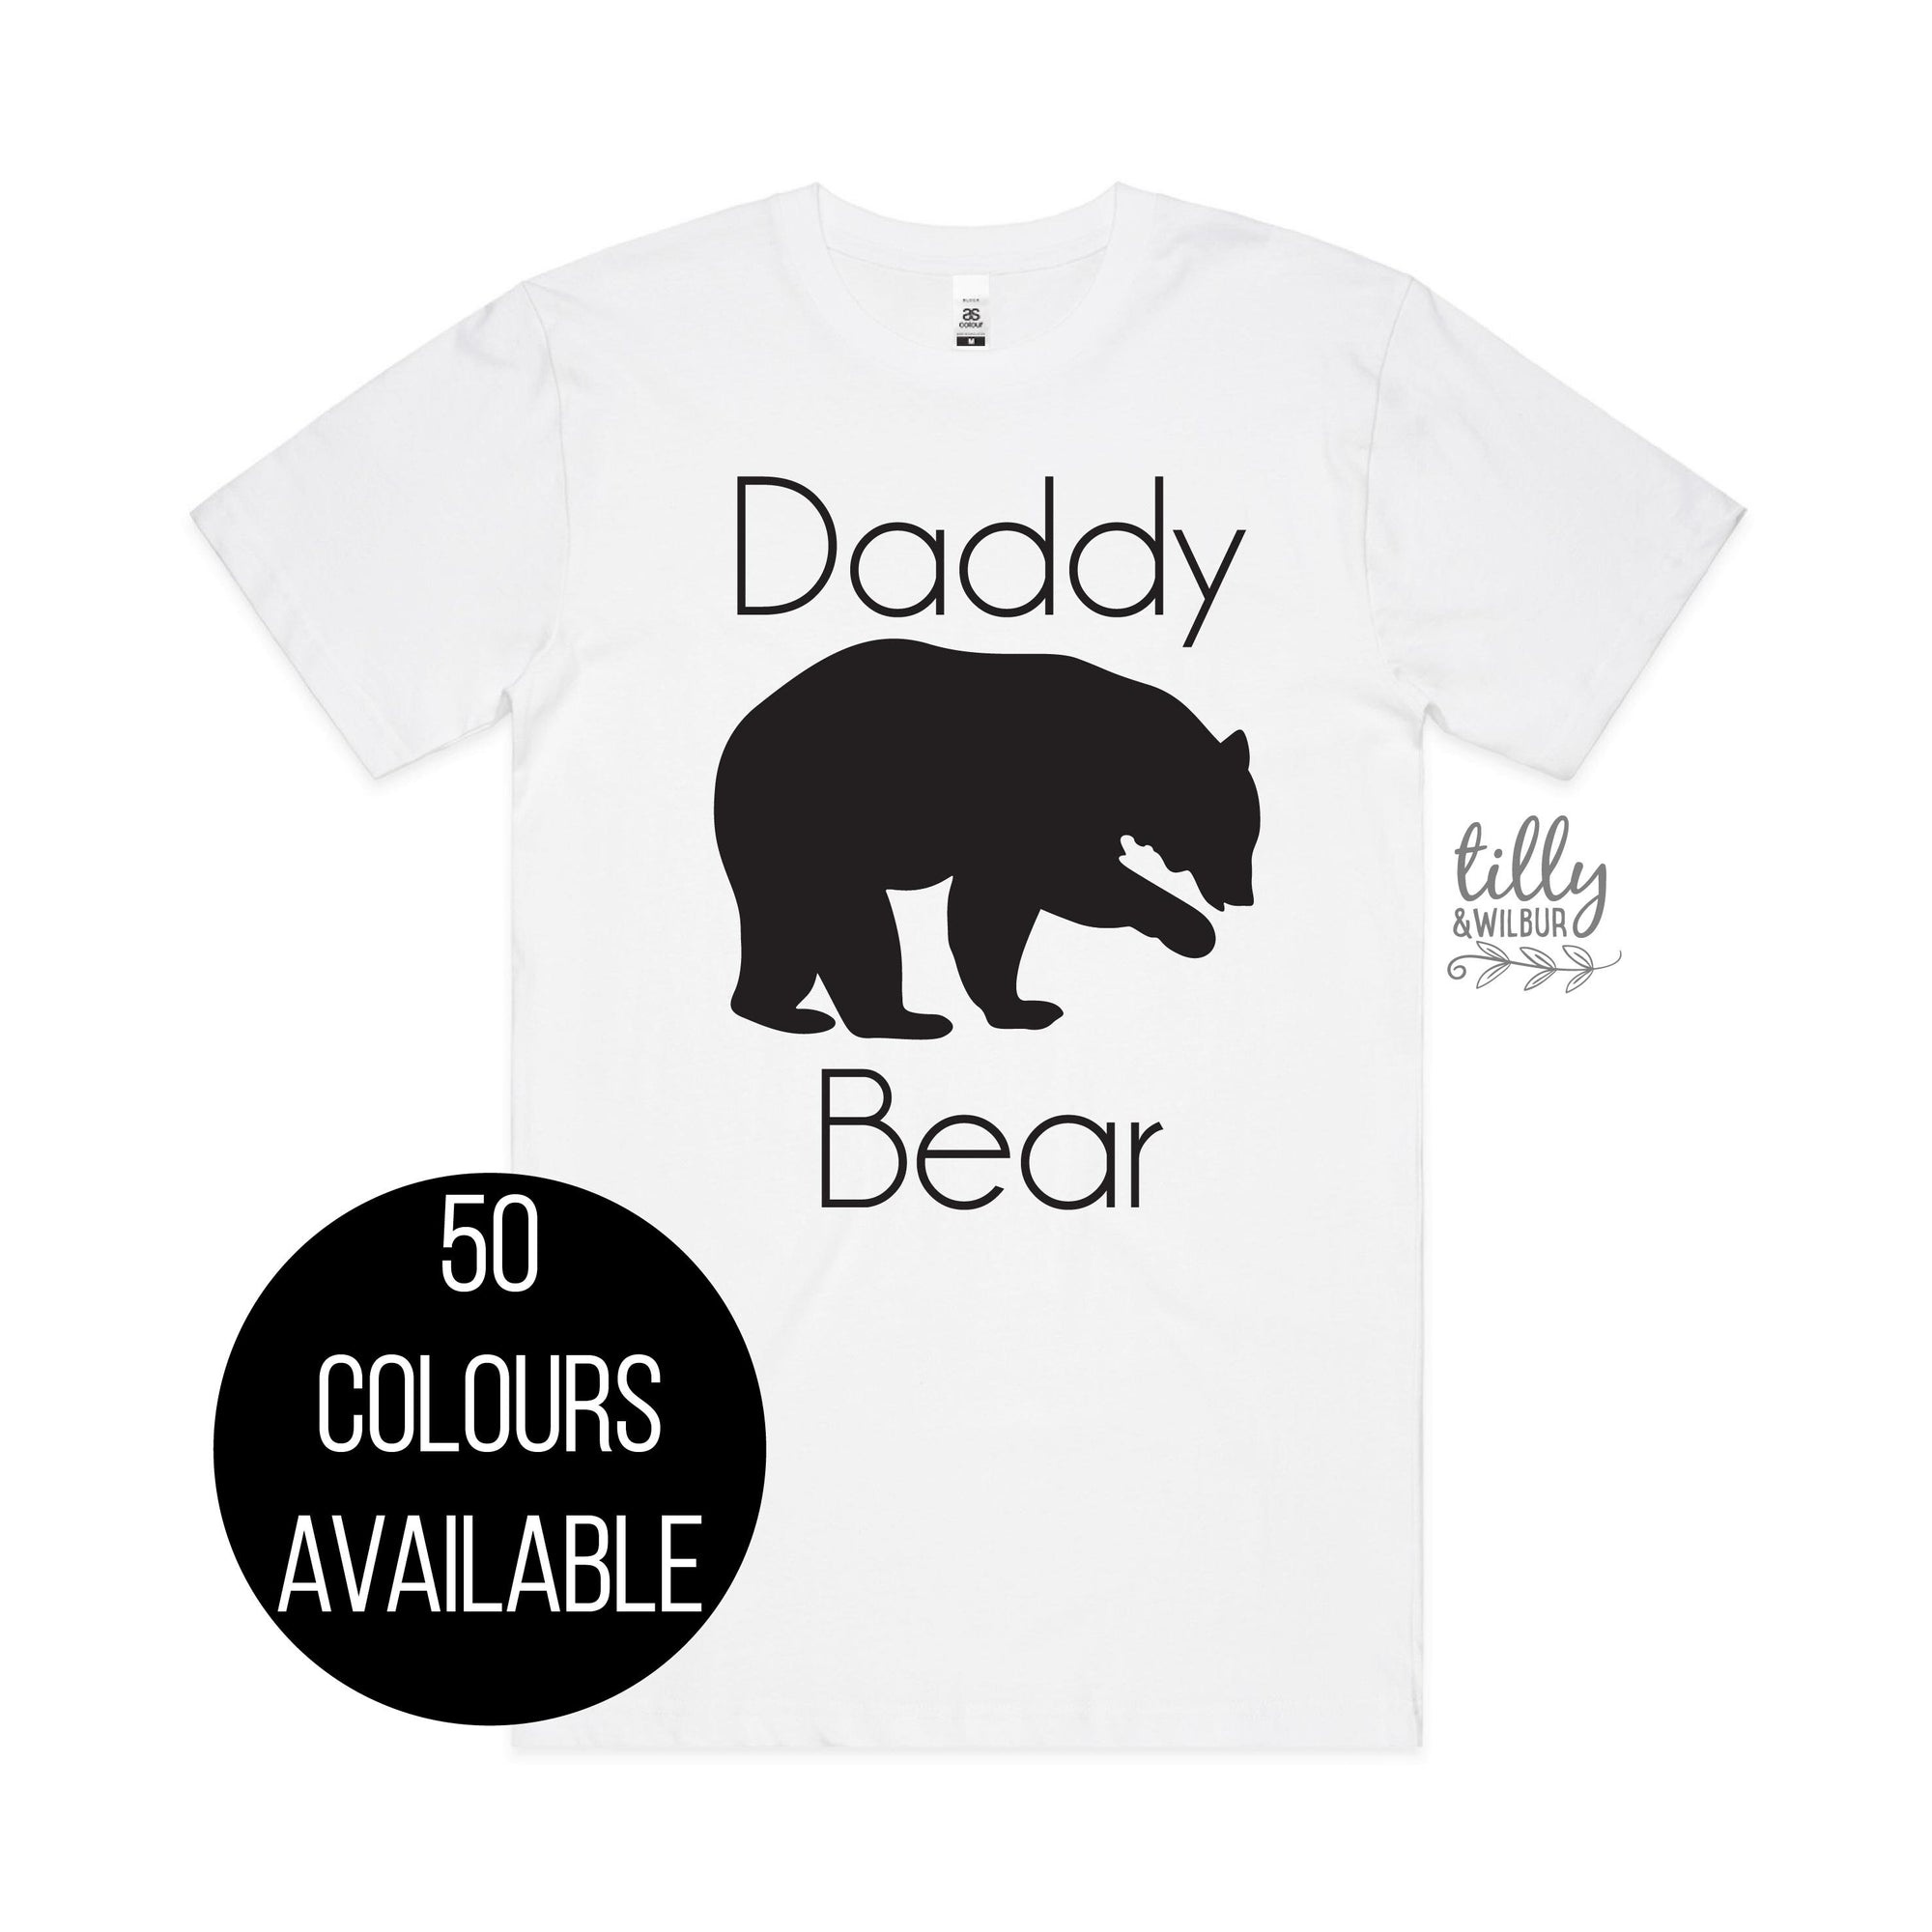 Daddy Bear T-Shirt, Matching Father's Day Outfits, Father Son Matching Shirts, Matching Daddy Baby Shirts, First 1st Father's Day, Bear Set